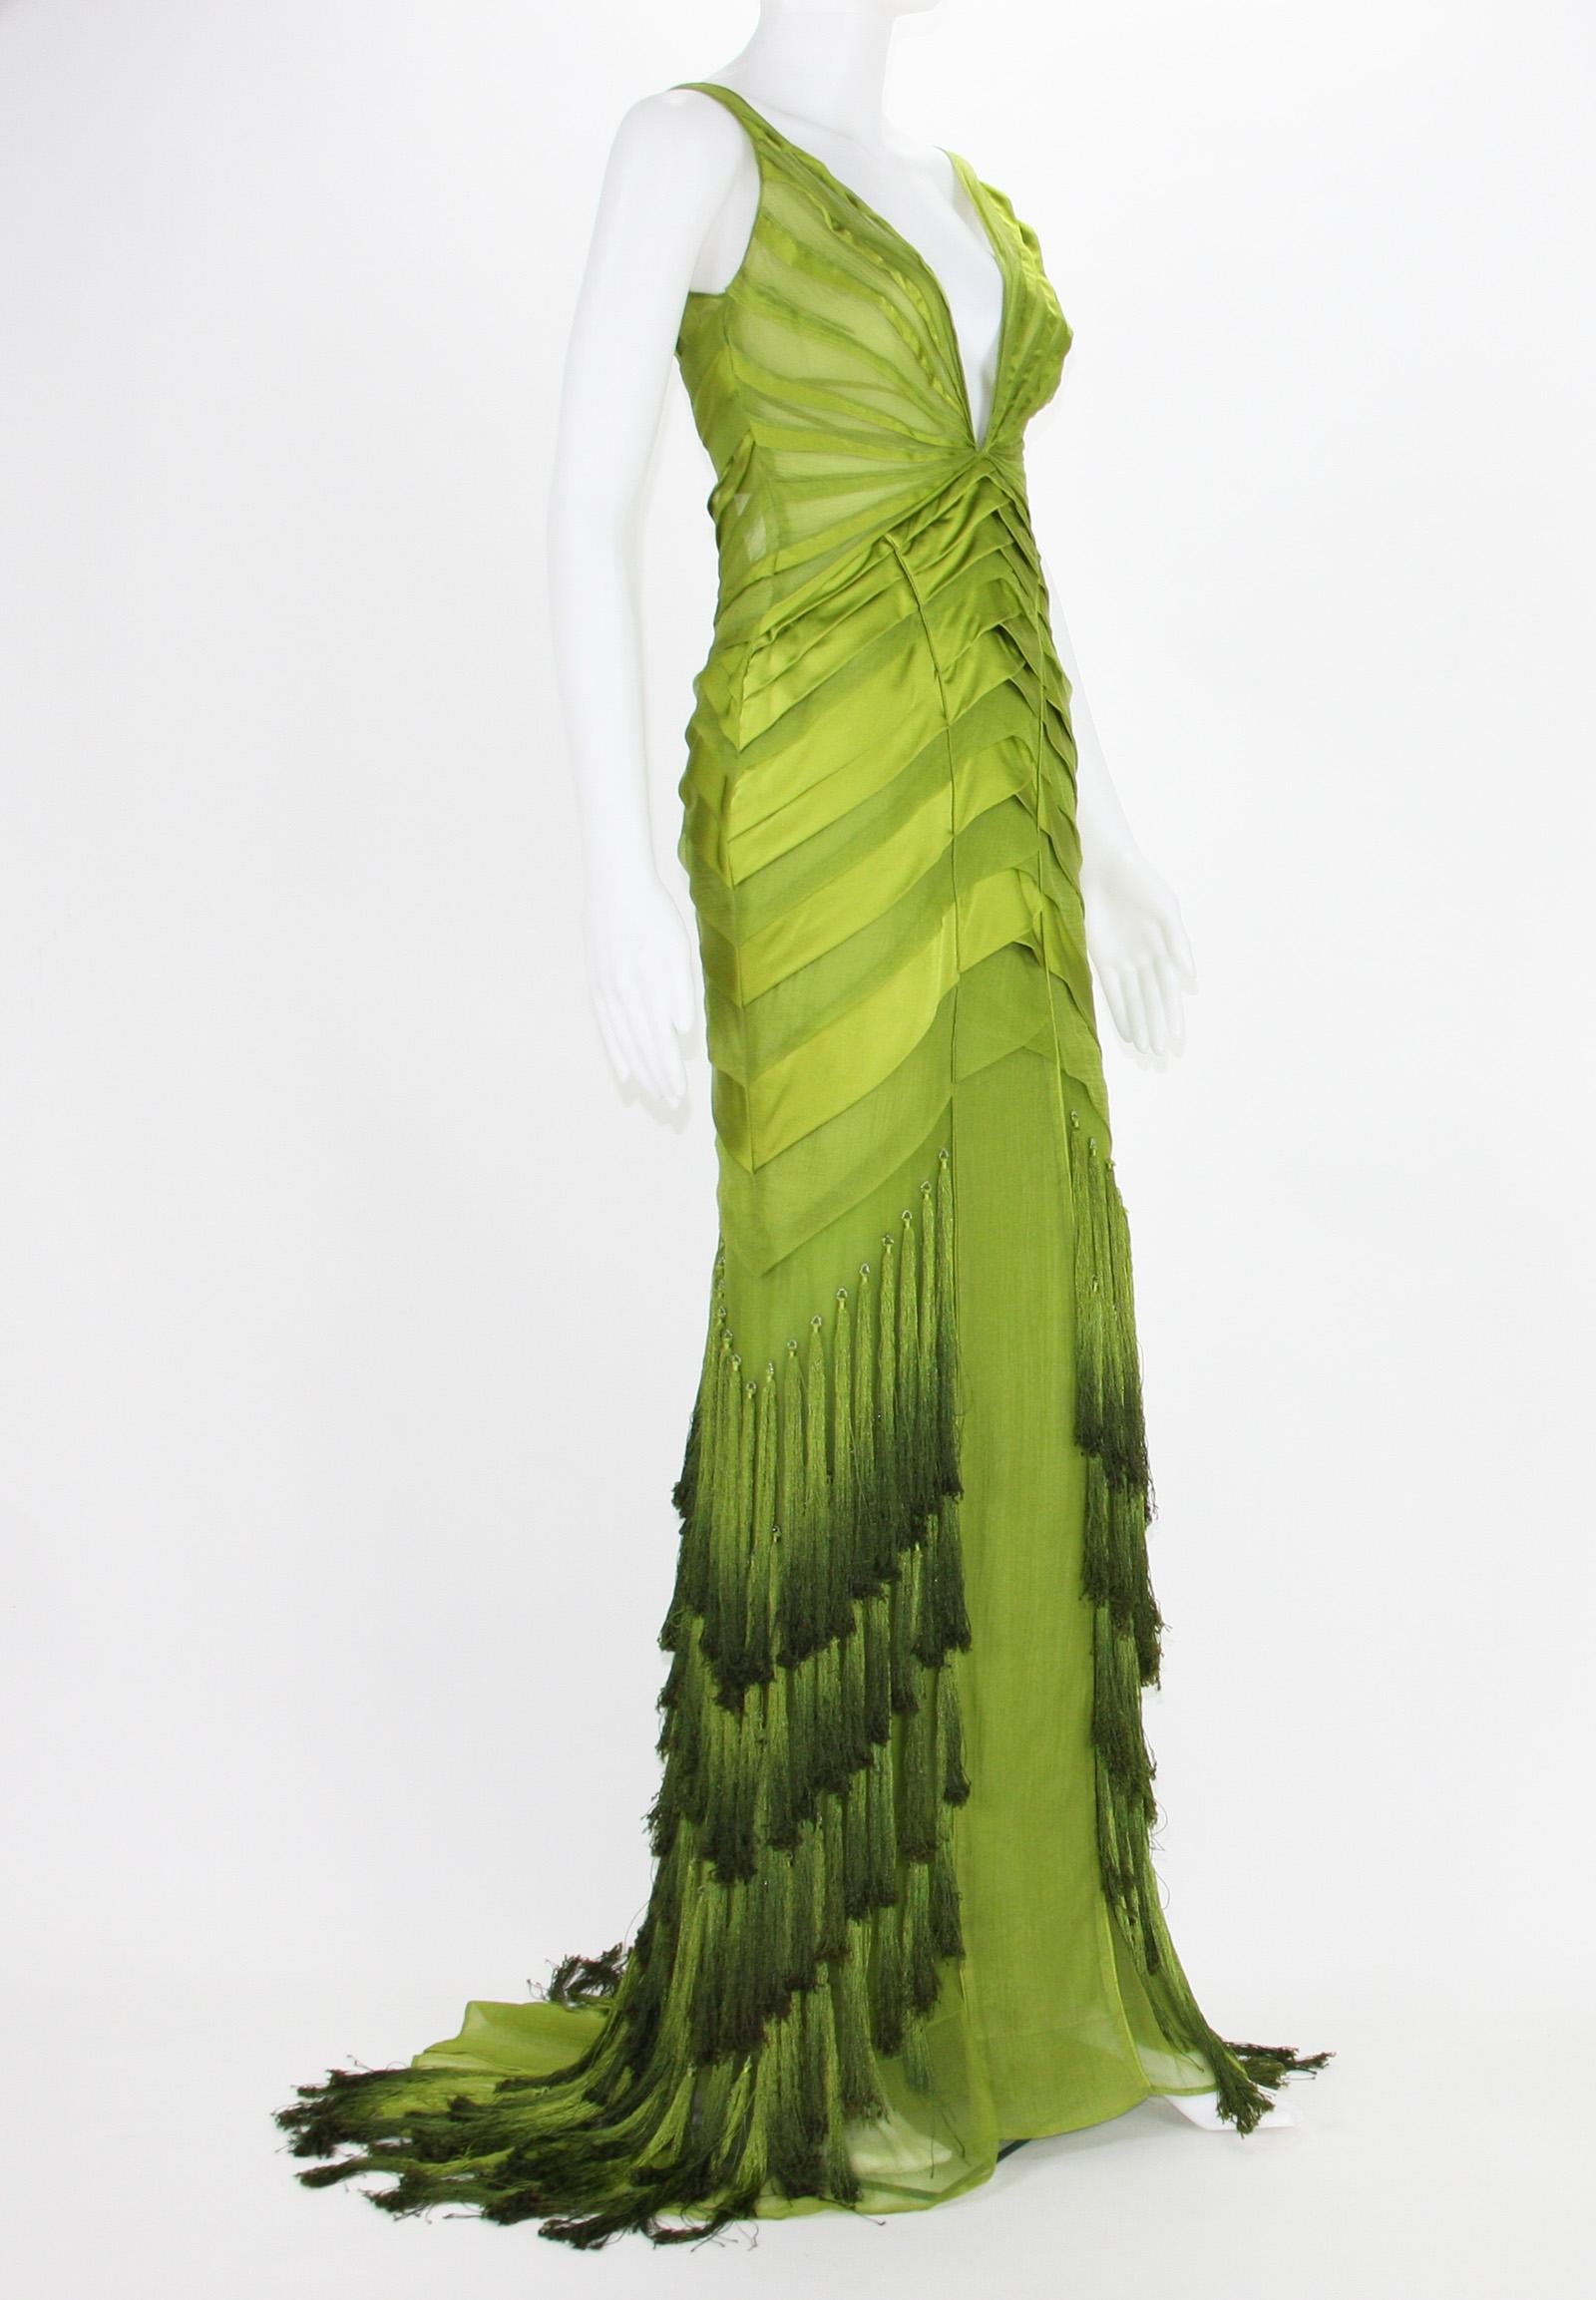 Tom Ford for Gucci Rare and Collectible Silk Green Tassel Dress Gown
Final F/W 2004 Collection
Designer size 40 - US 4
Made in Italy
Gown in Perfect Vintage Condition Except Missing Few Tassels on Bottom.
Matching Green Corset Shoes in size 9 B